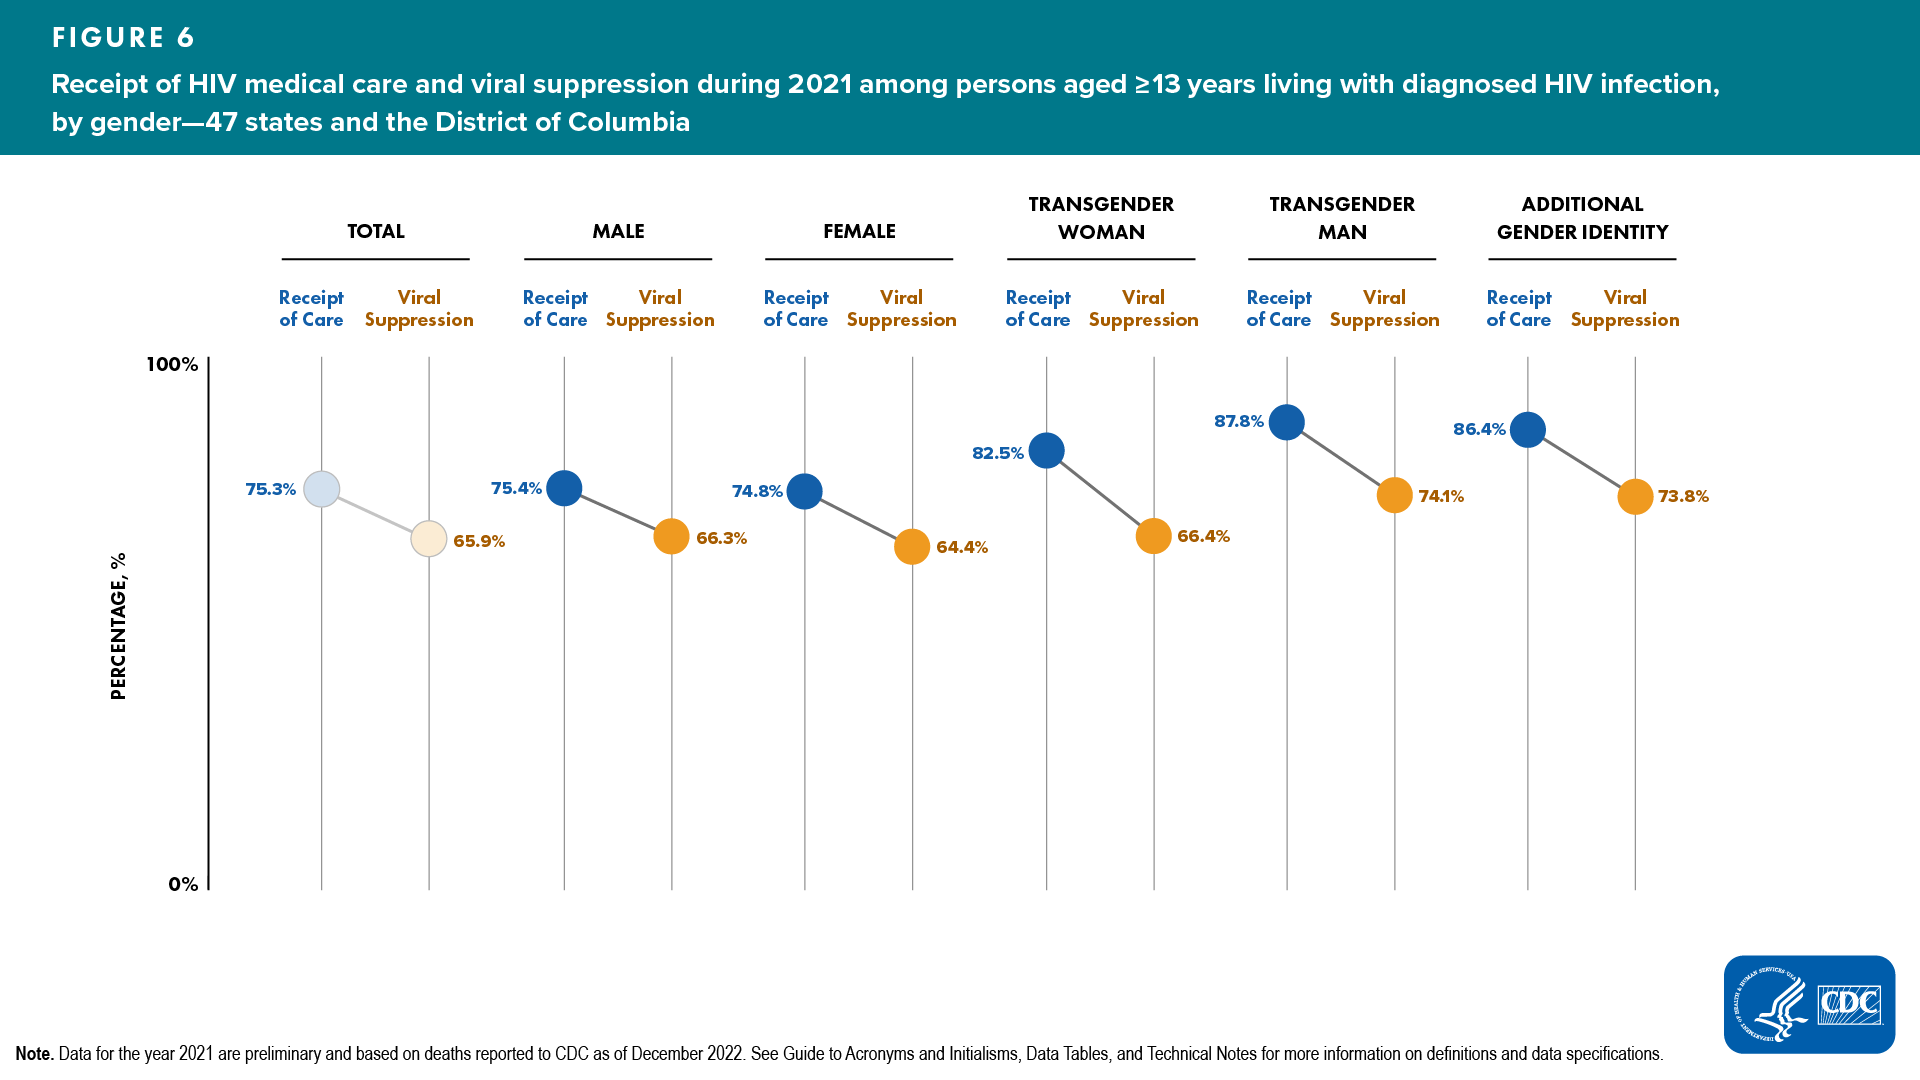 Figure 6. Receipt of HIV medical care and viral suppression during 2021 among persons aged ≥13 years living with diagnosed HIV infection, by gender — 47 states and the District of Columbia